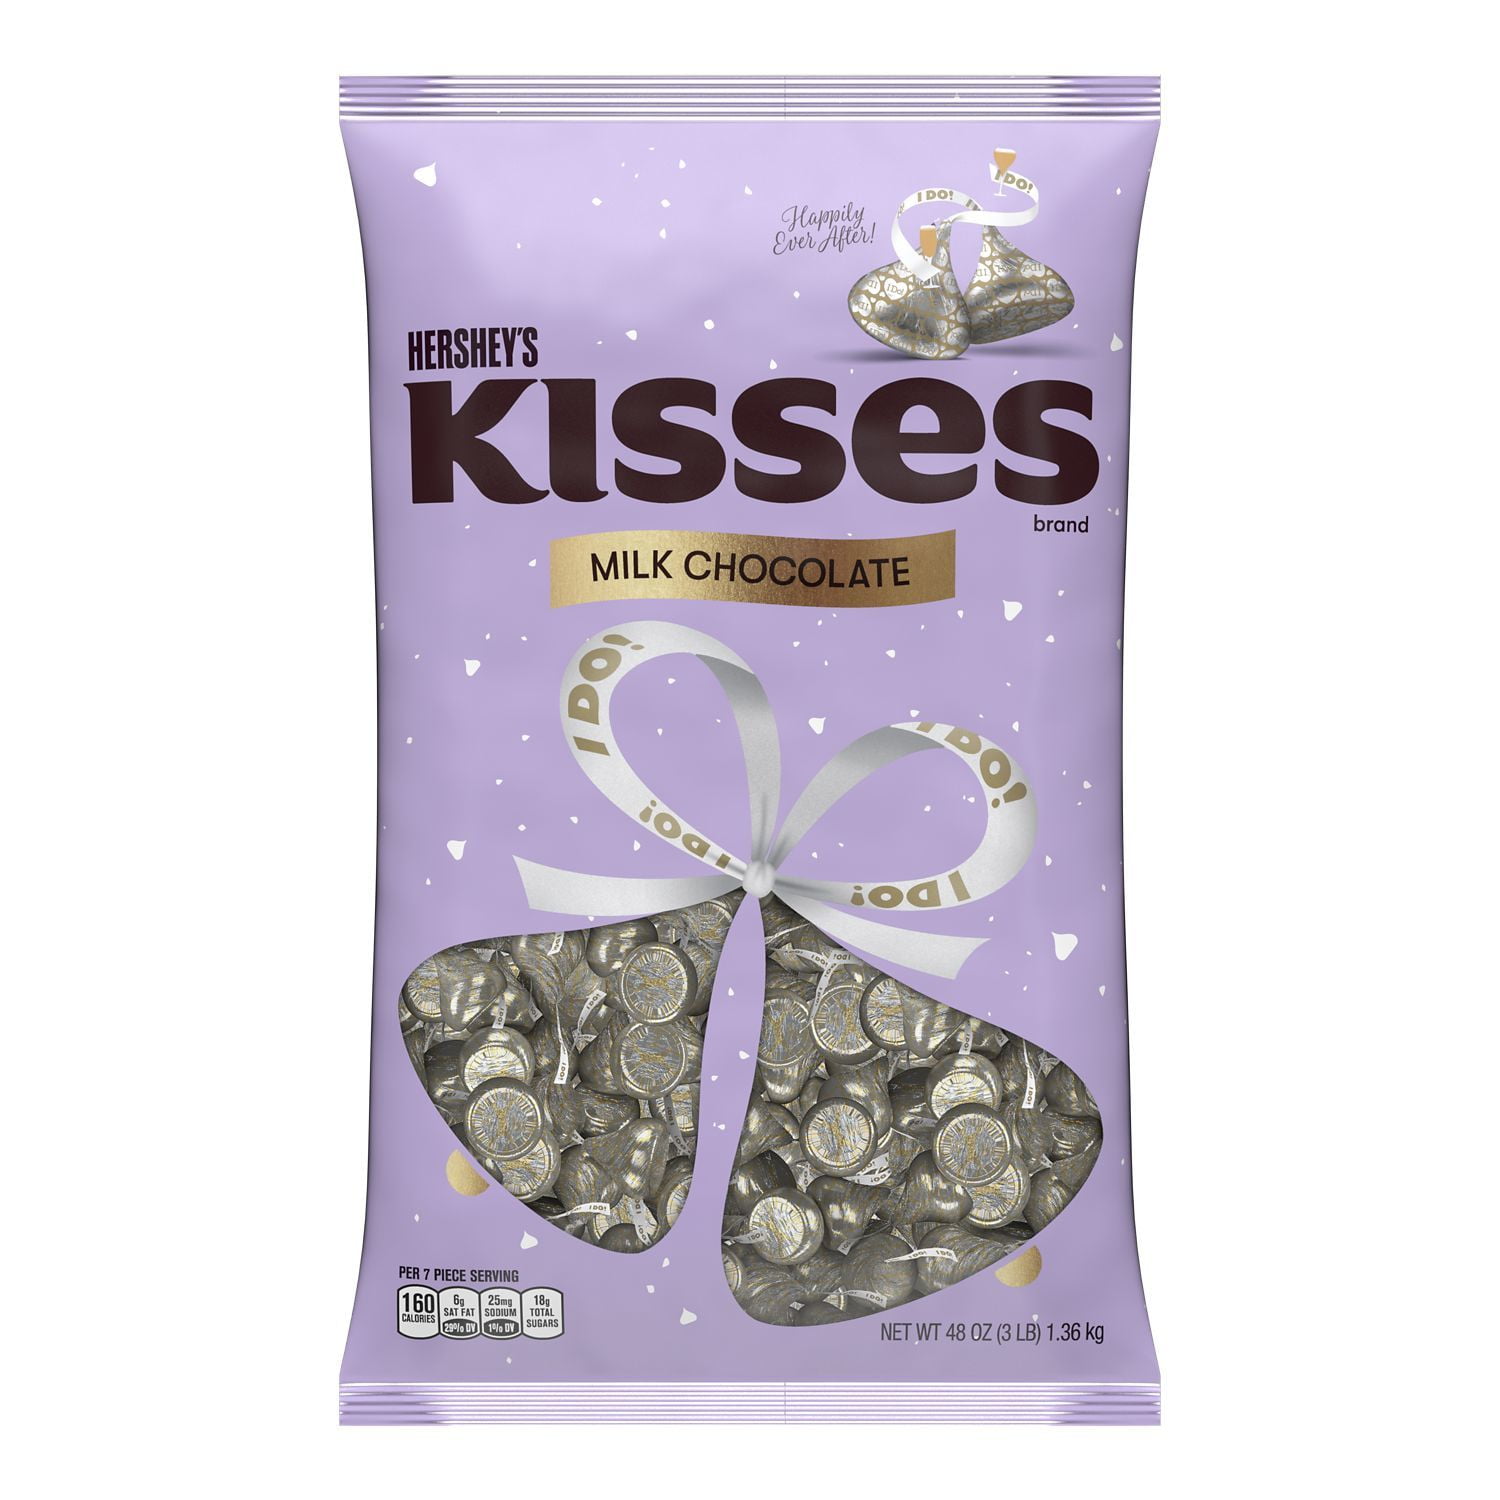 DIY Chocolate Kisses - Eating Gluten and Dairy Free